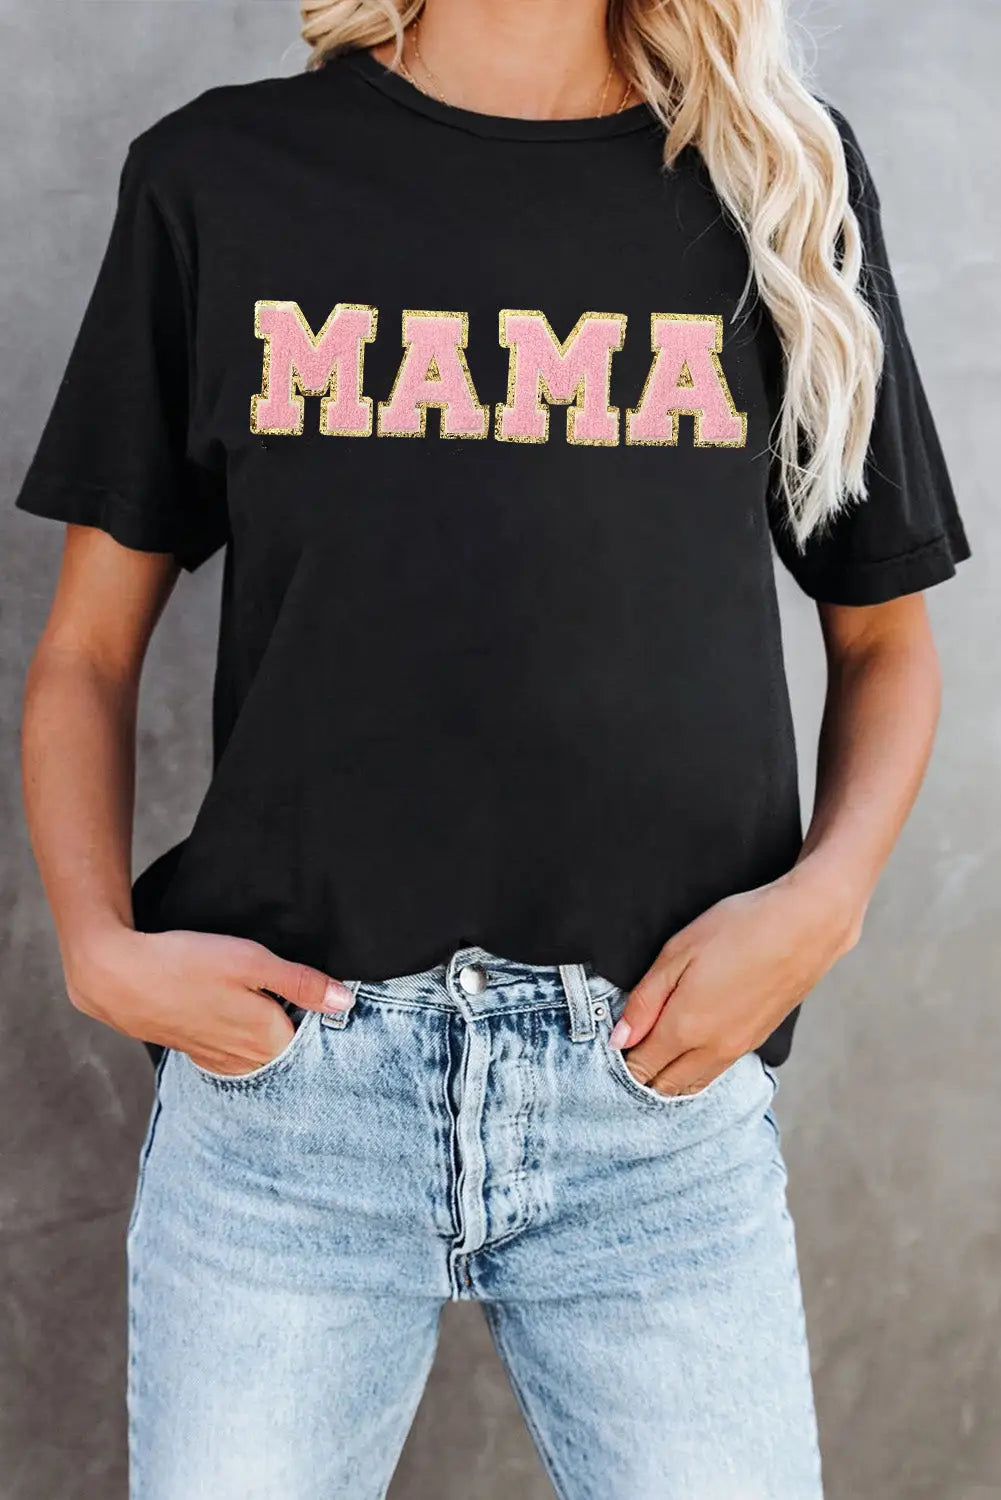 Black mama chenille graphic tee - s / 62% polyester + 32% cotton + 6% elastane - t-shirts